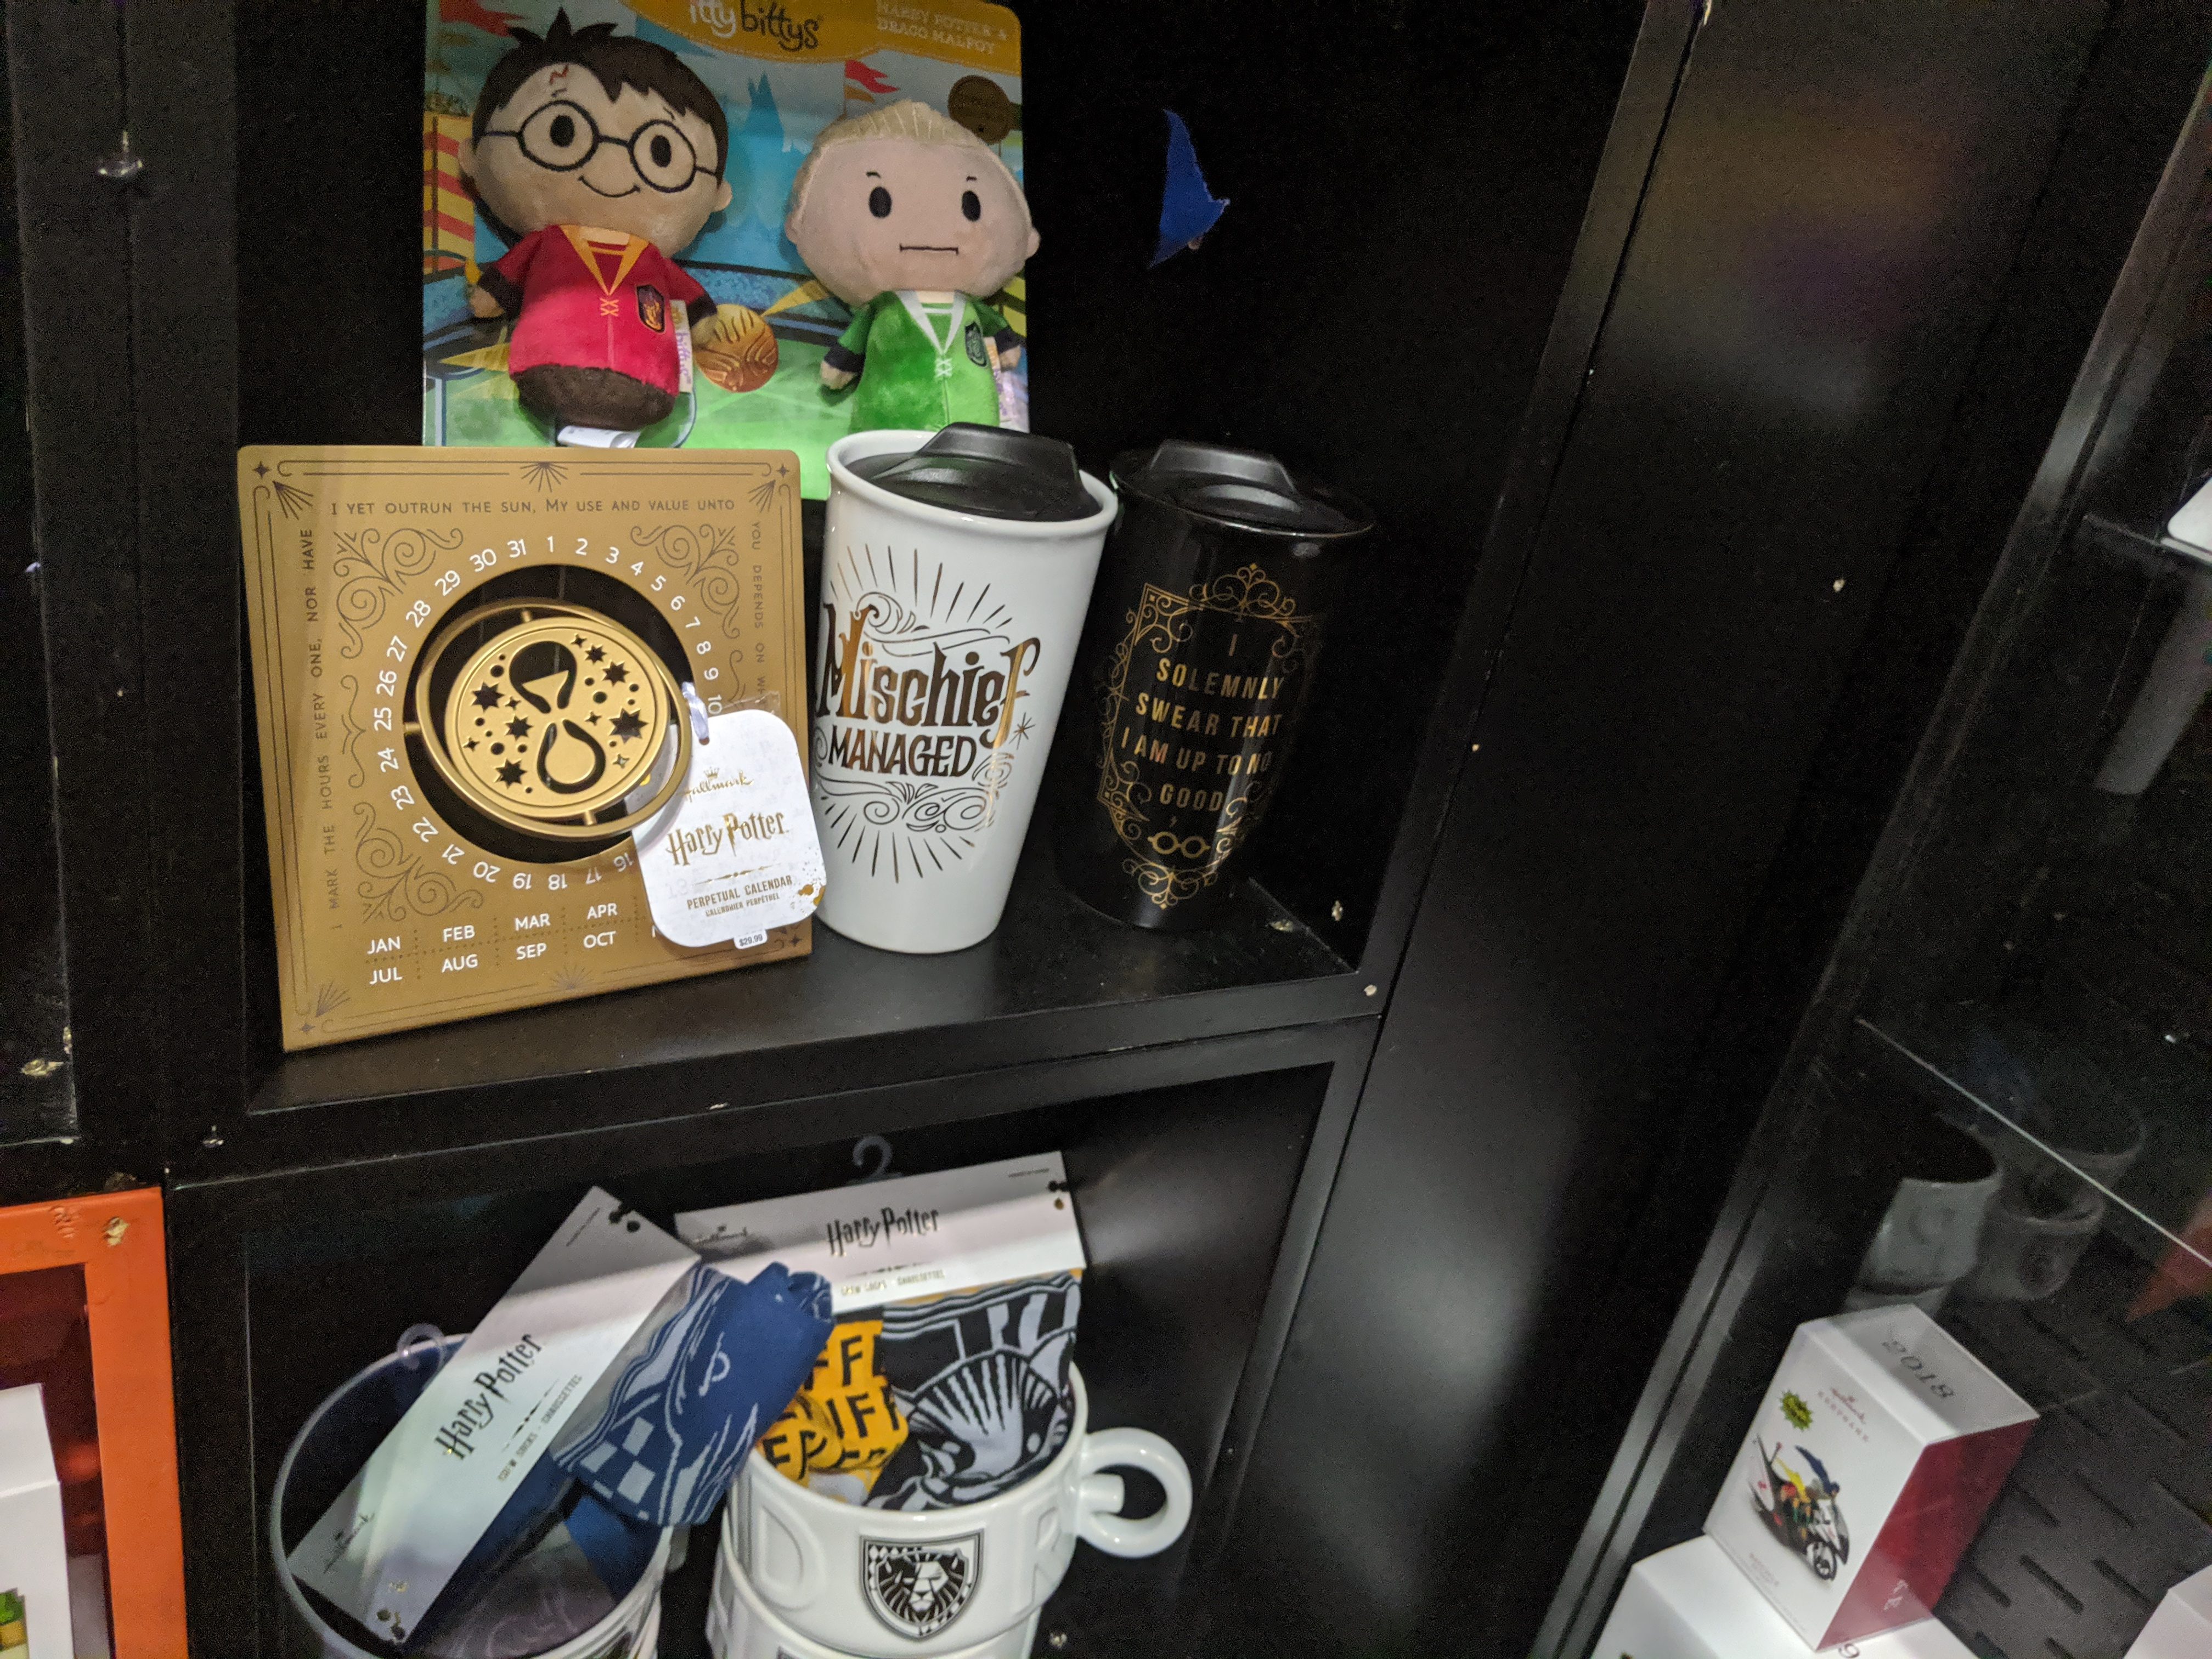 You’ll find “Potter”-themed mugs at the PopMinded by Hallmark booth.